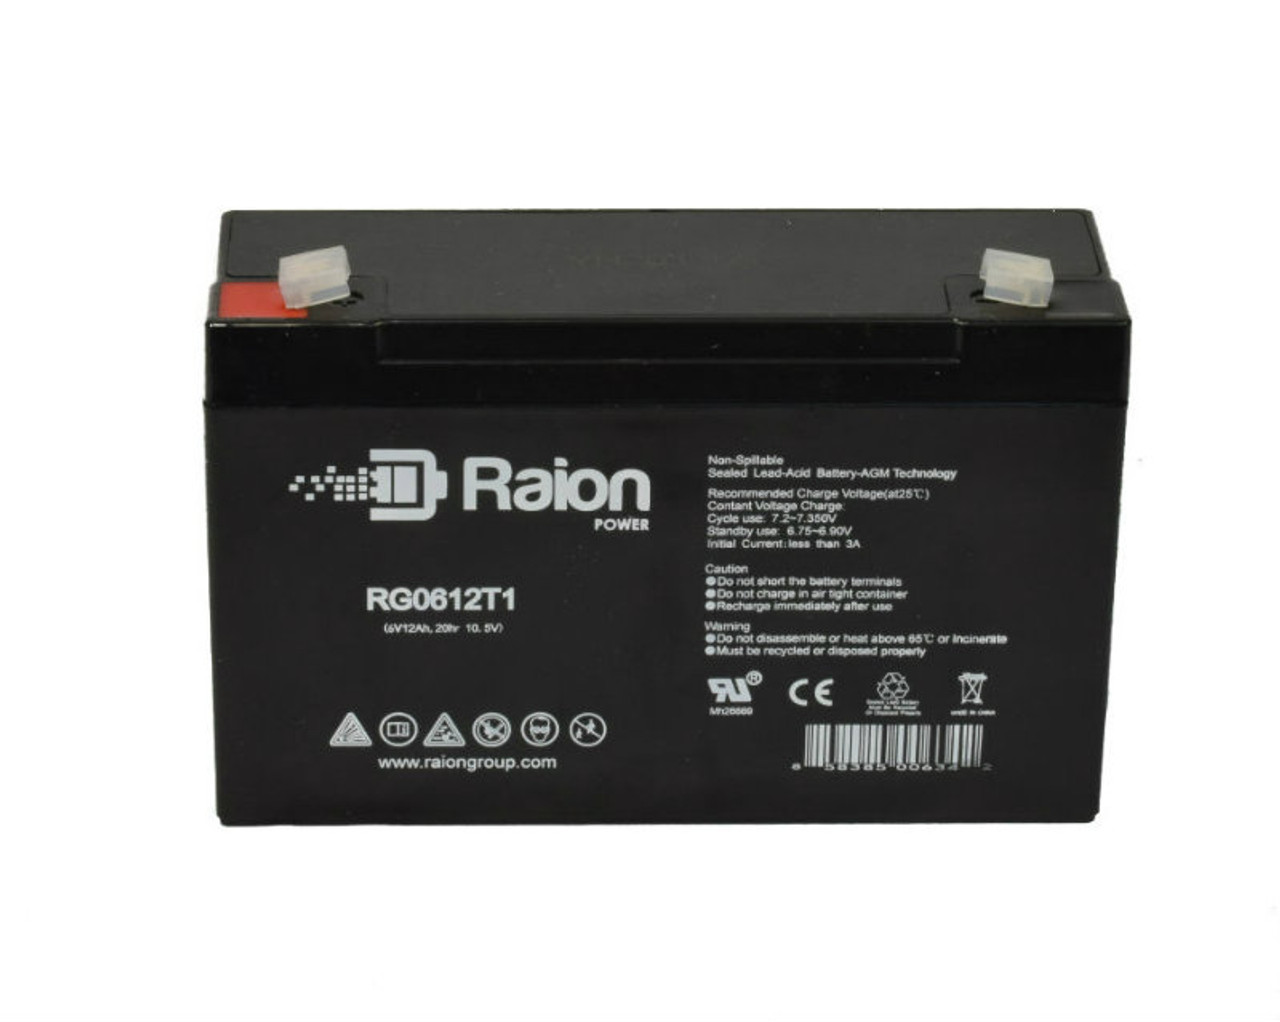 Raion Power RG06120T1 Replacement Battery Cartridge for PowerWare PW5115-1500RM